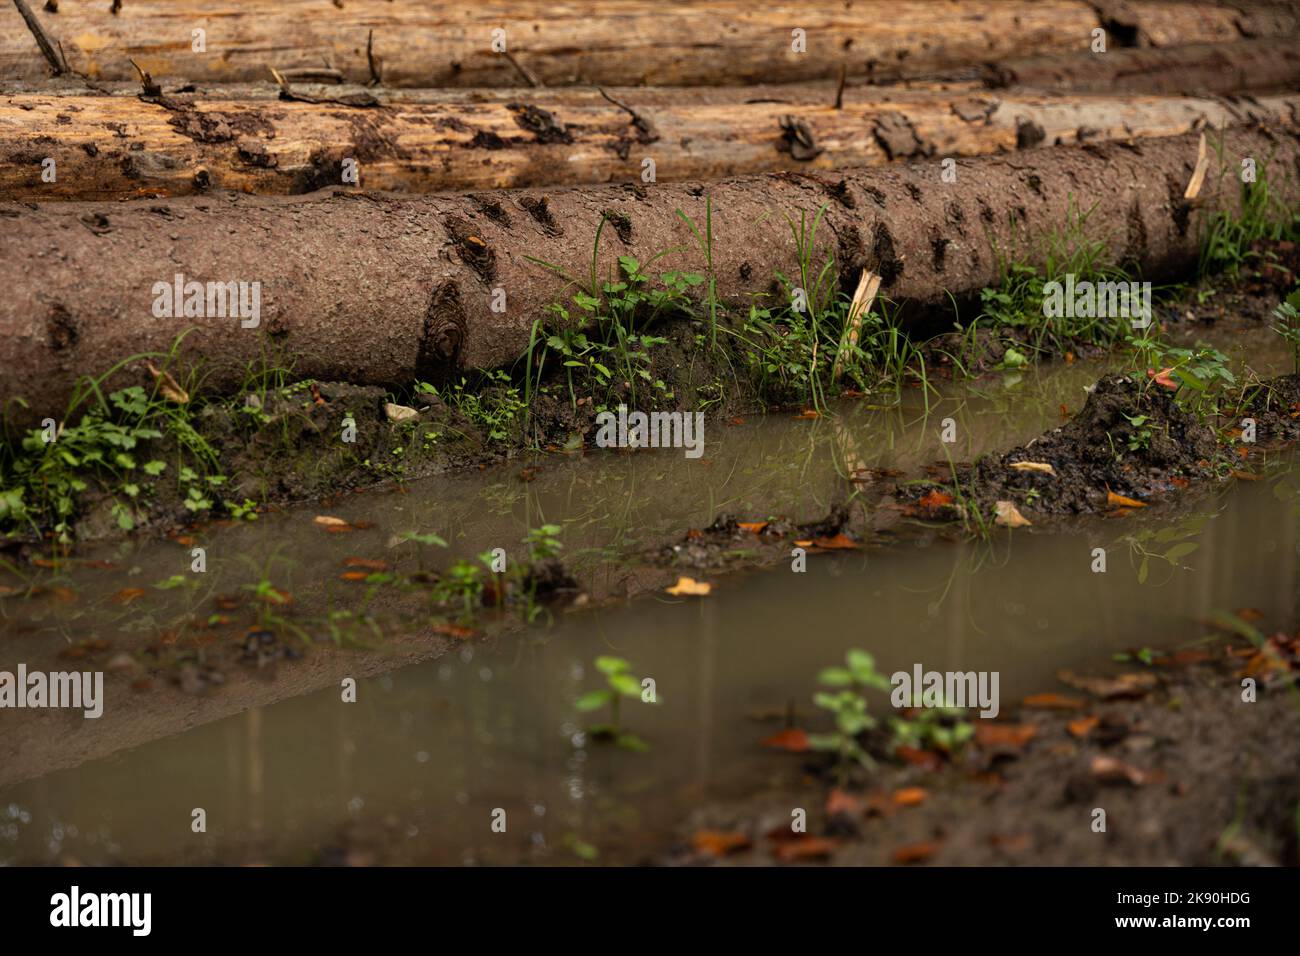 Wooden felled trees falling on wet ground with grass Stock Photo